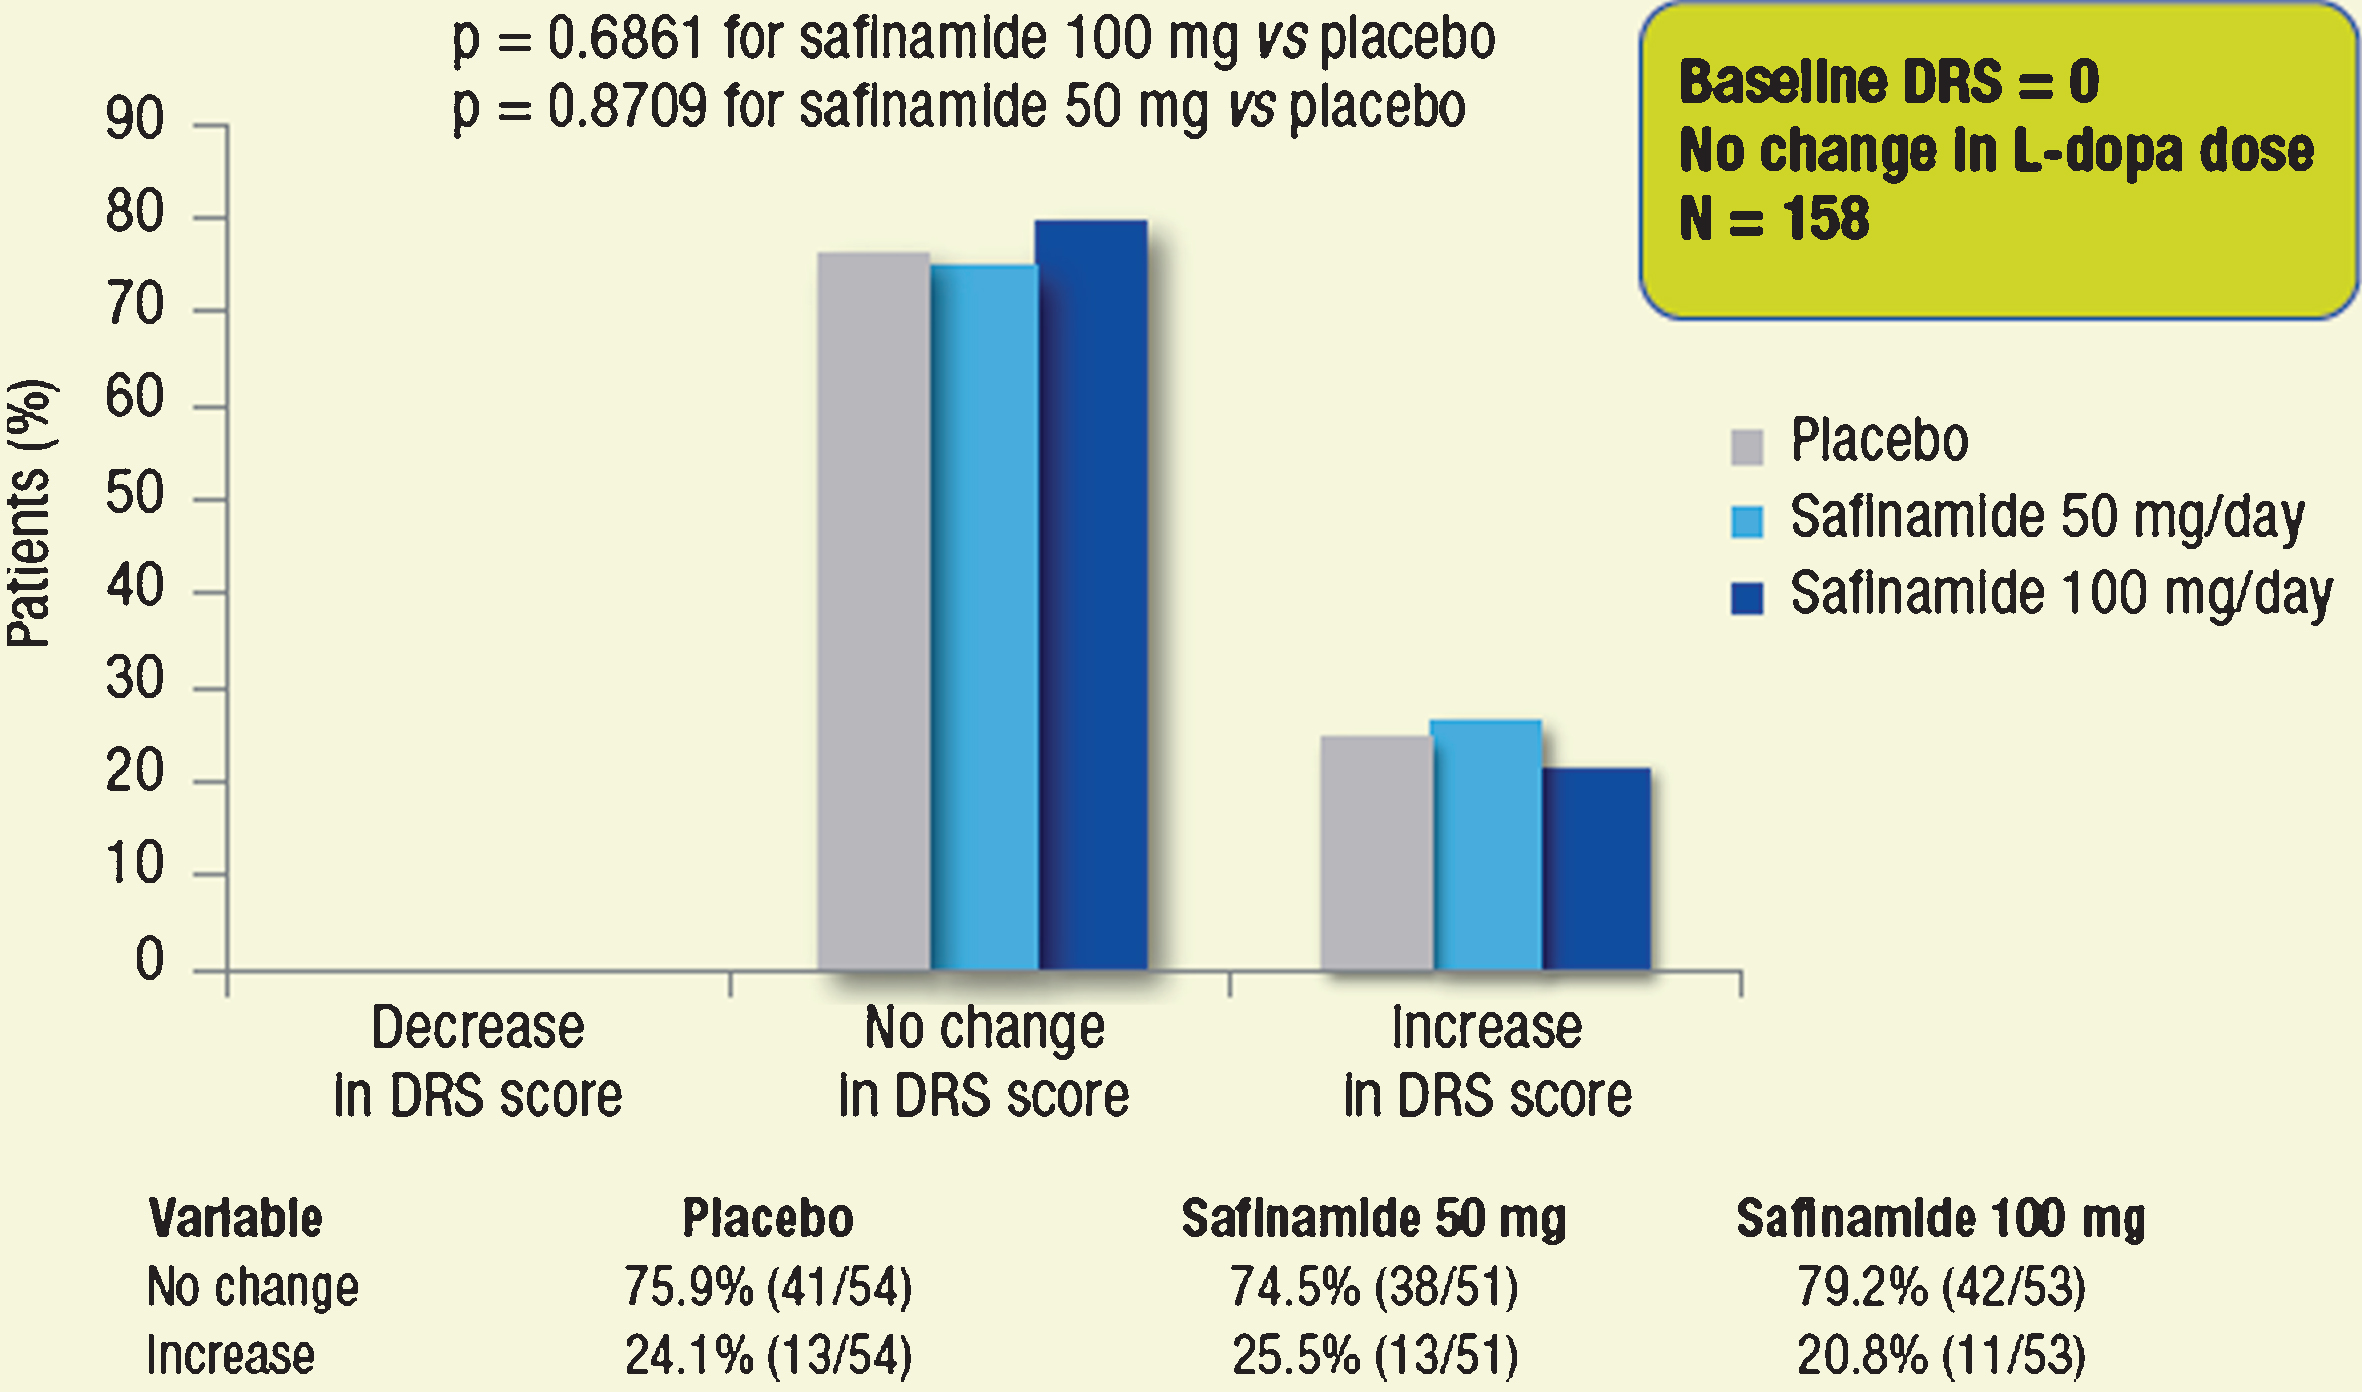 Proportions of patients with different categorical changes in DRS score (decrease, no change, increase). Subgroups of patients without dyskinesia at baseline, whose dose of L-dopa was not changed throughout the study.